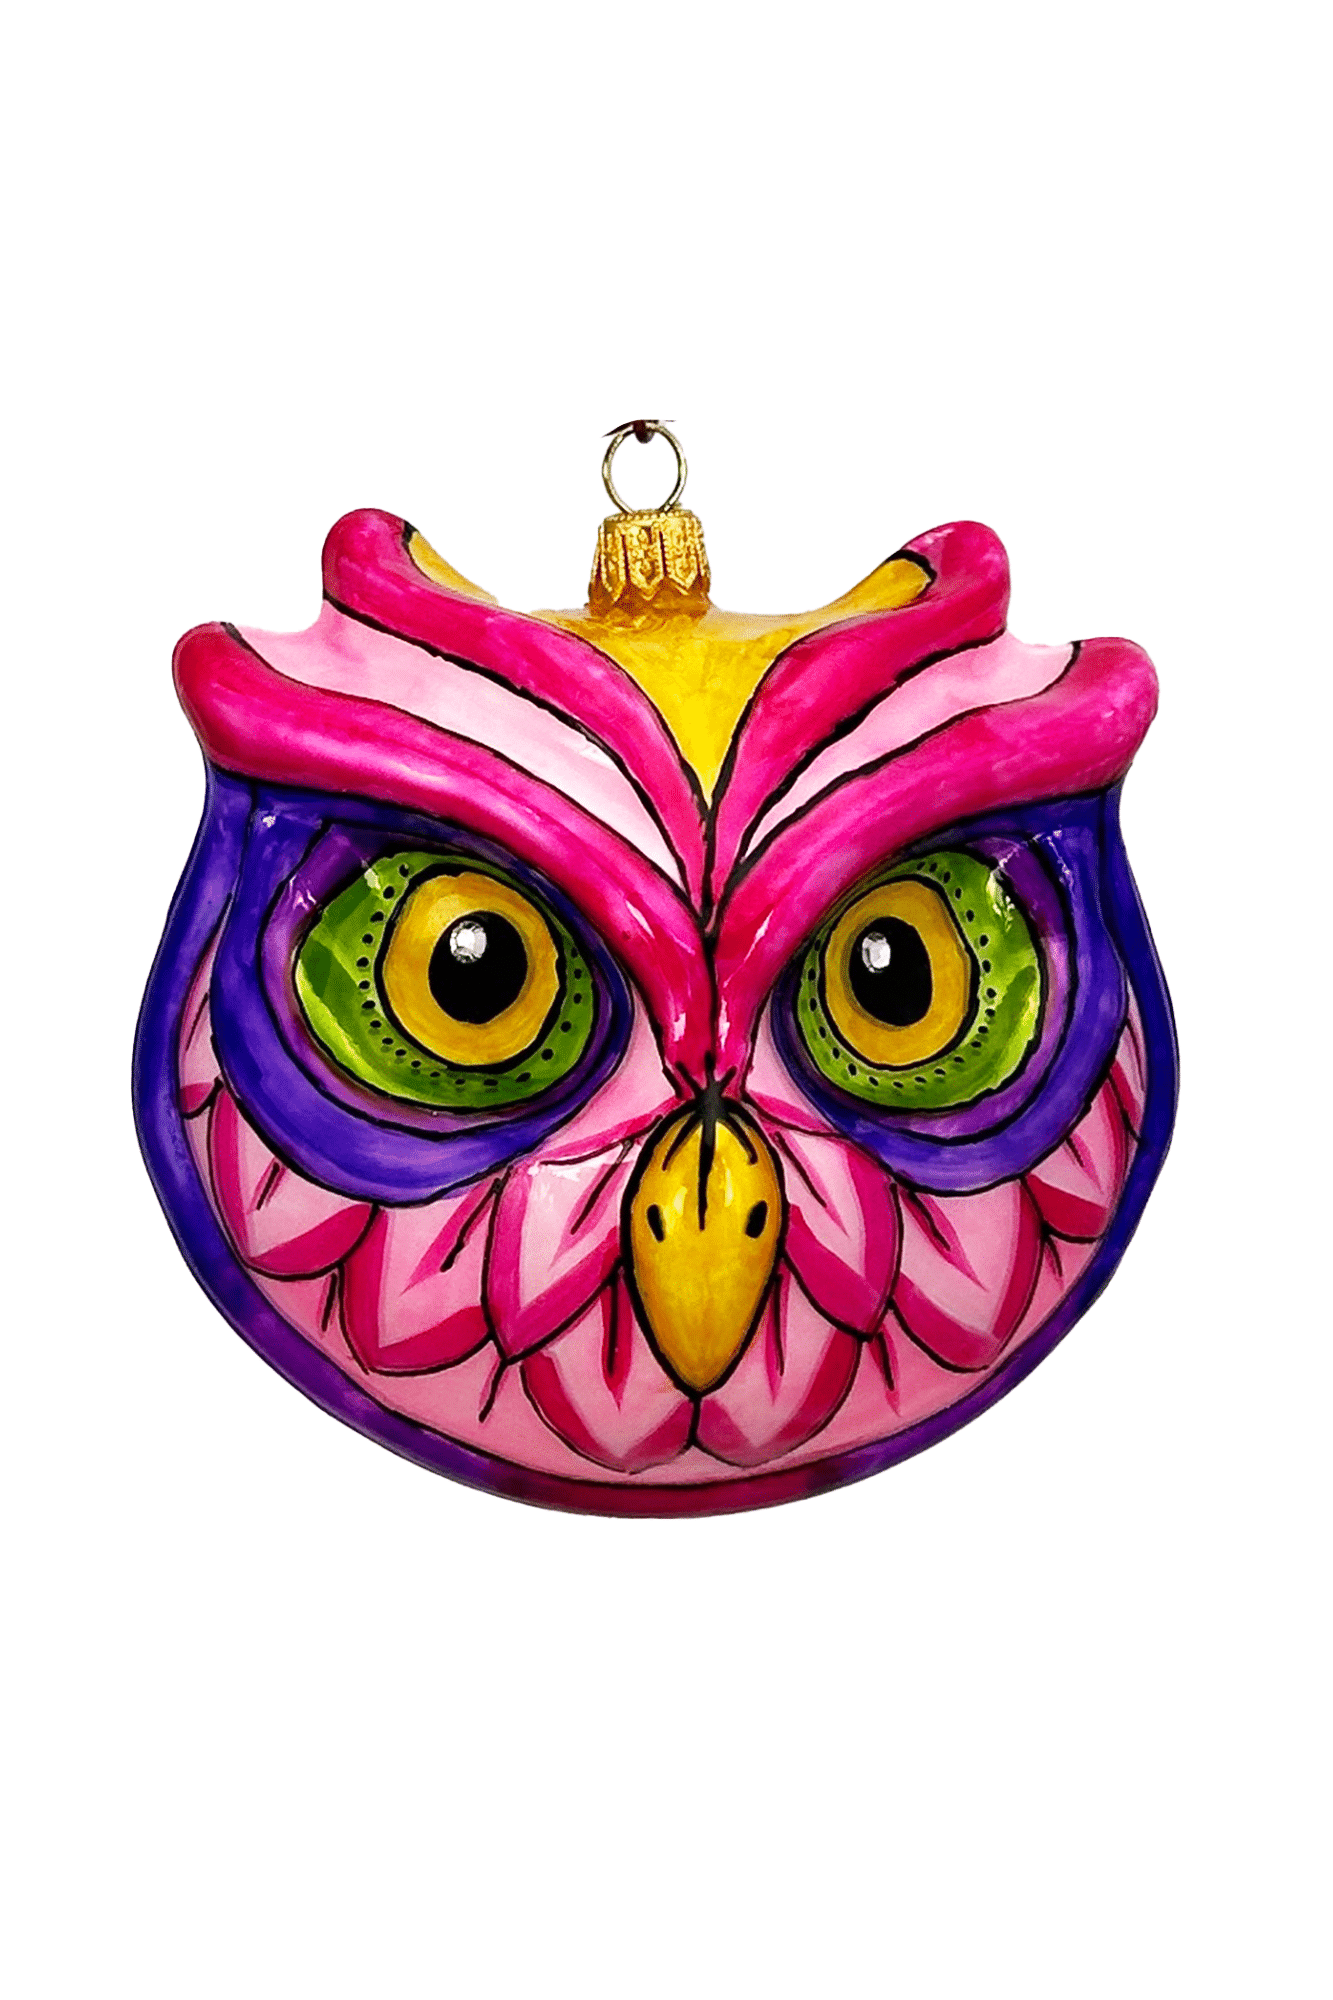 pink peony floral chinoiserie owl featuring bright fuchsia magenta and saturated colors. owl face with big eyes and beak